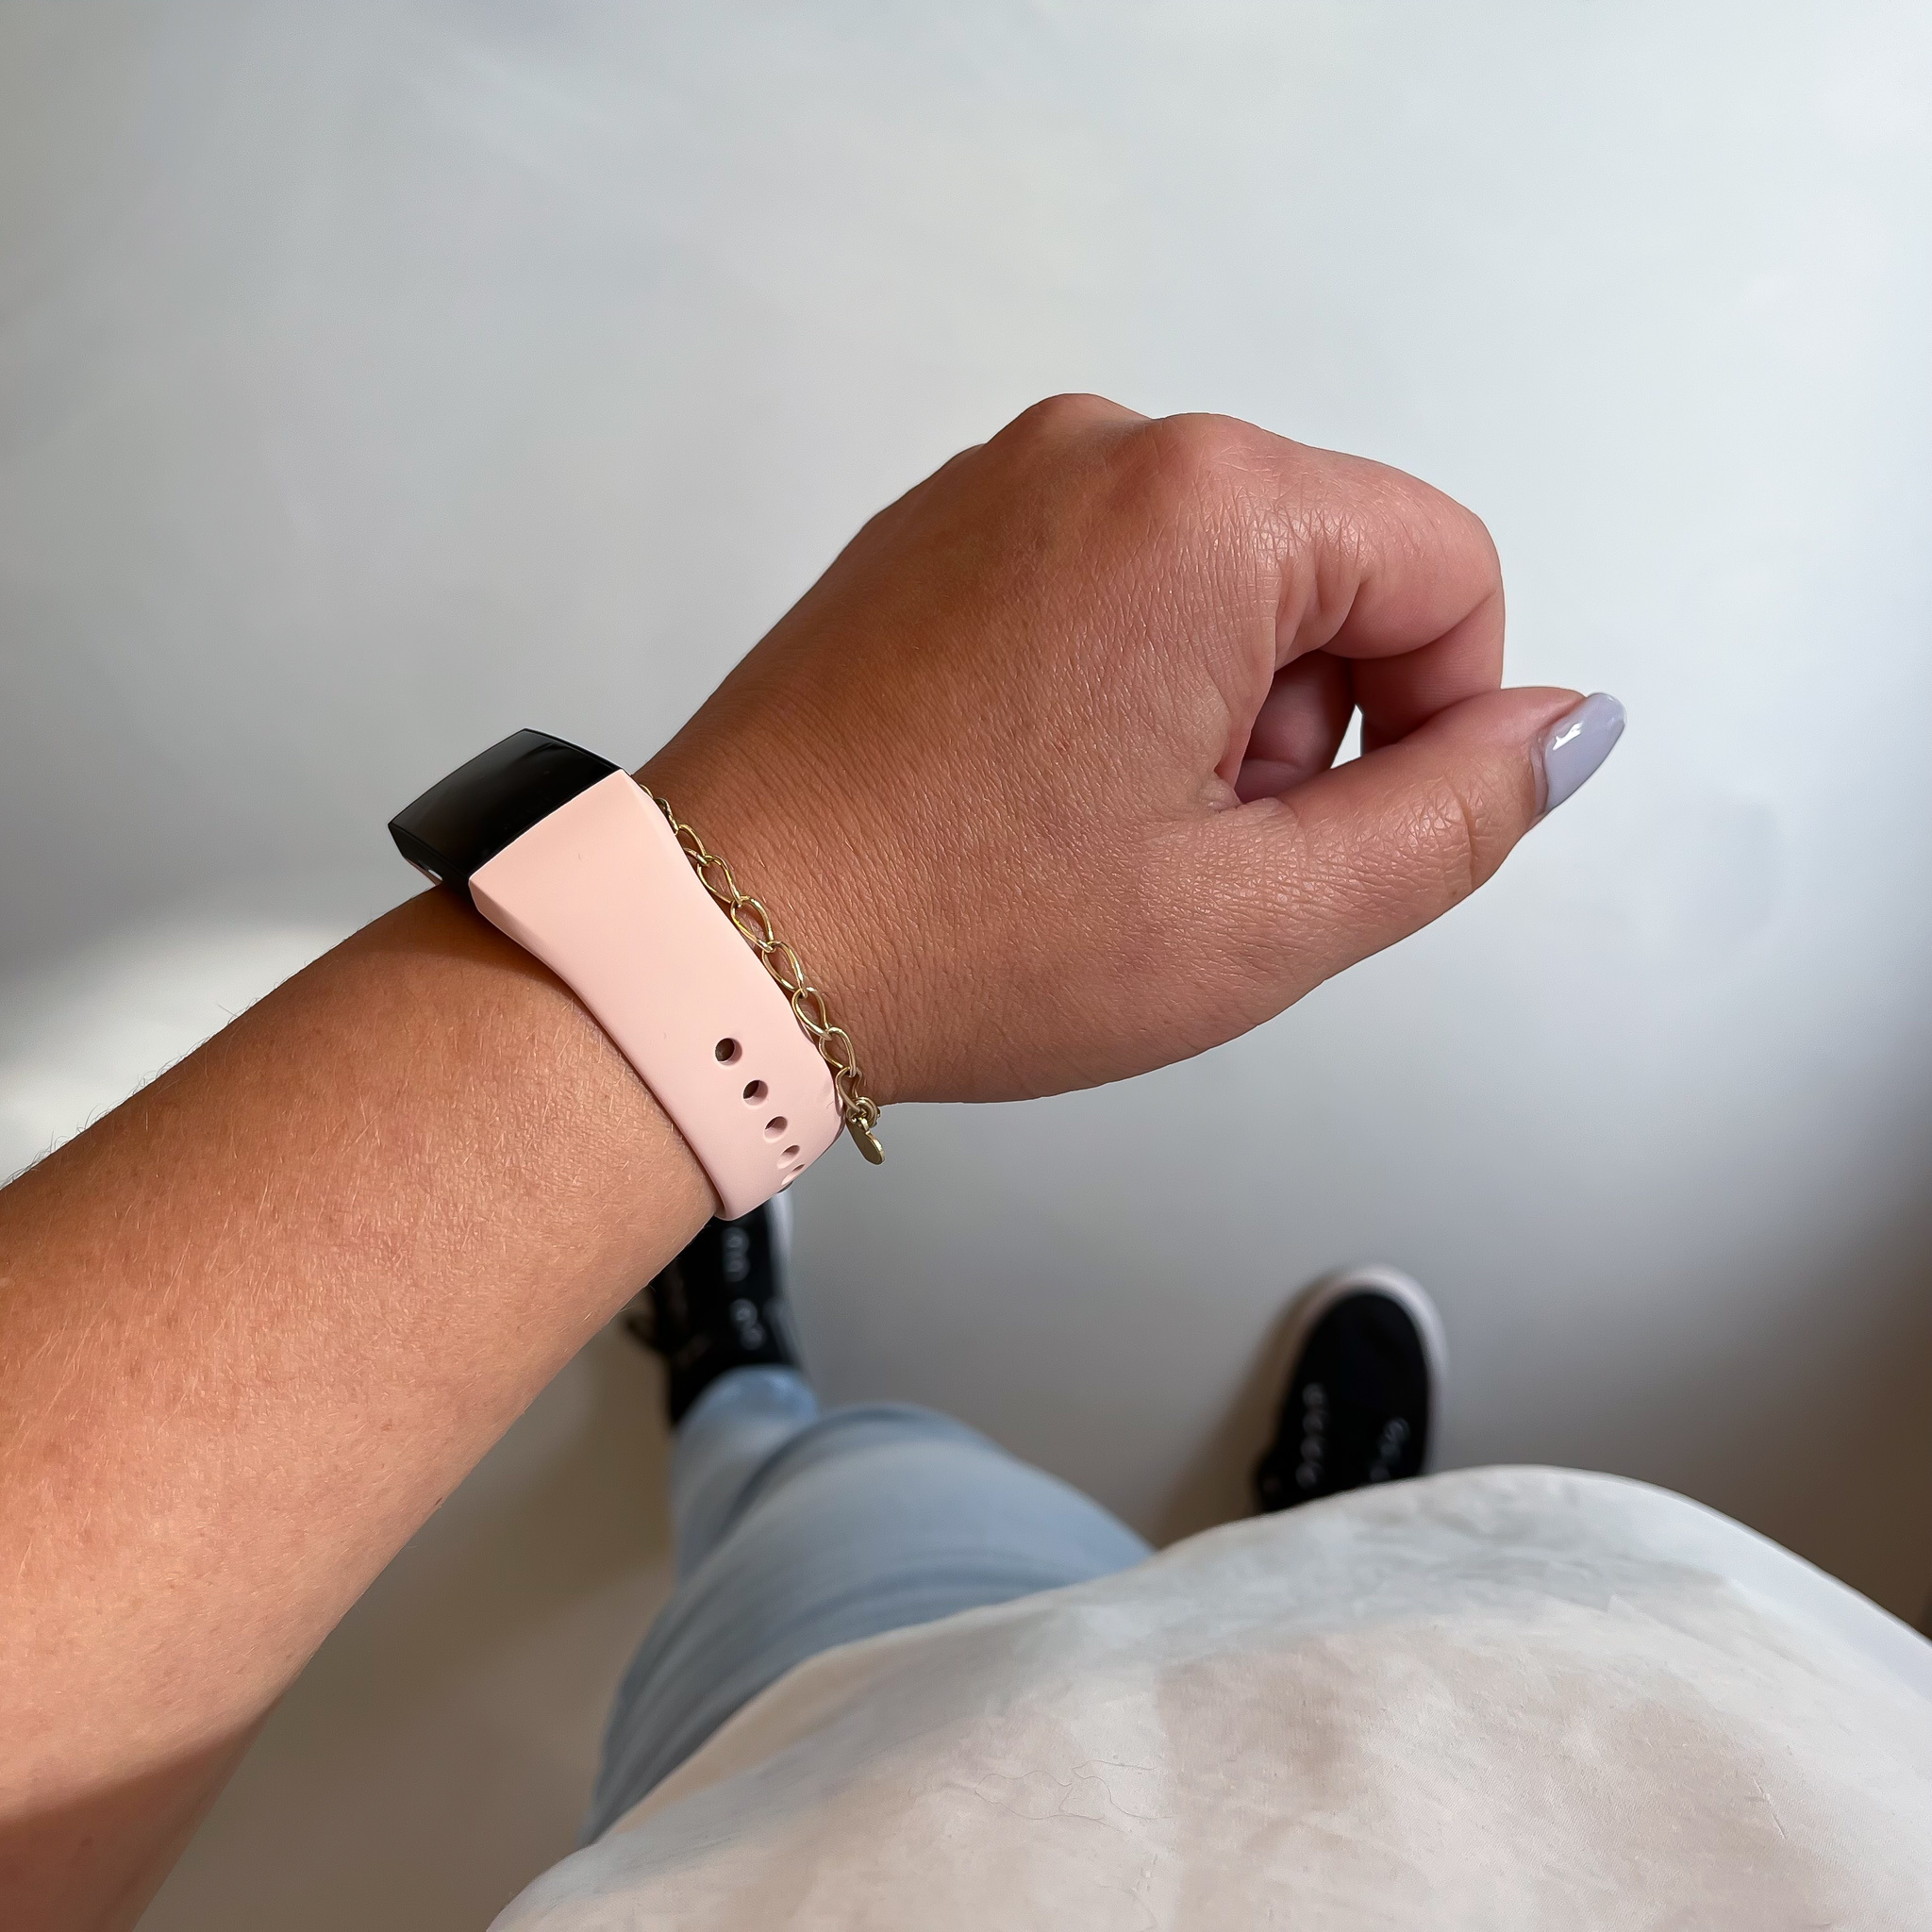 Fitbit Charge 3 &Amp; 4 Sport Strap - Pink Sand